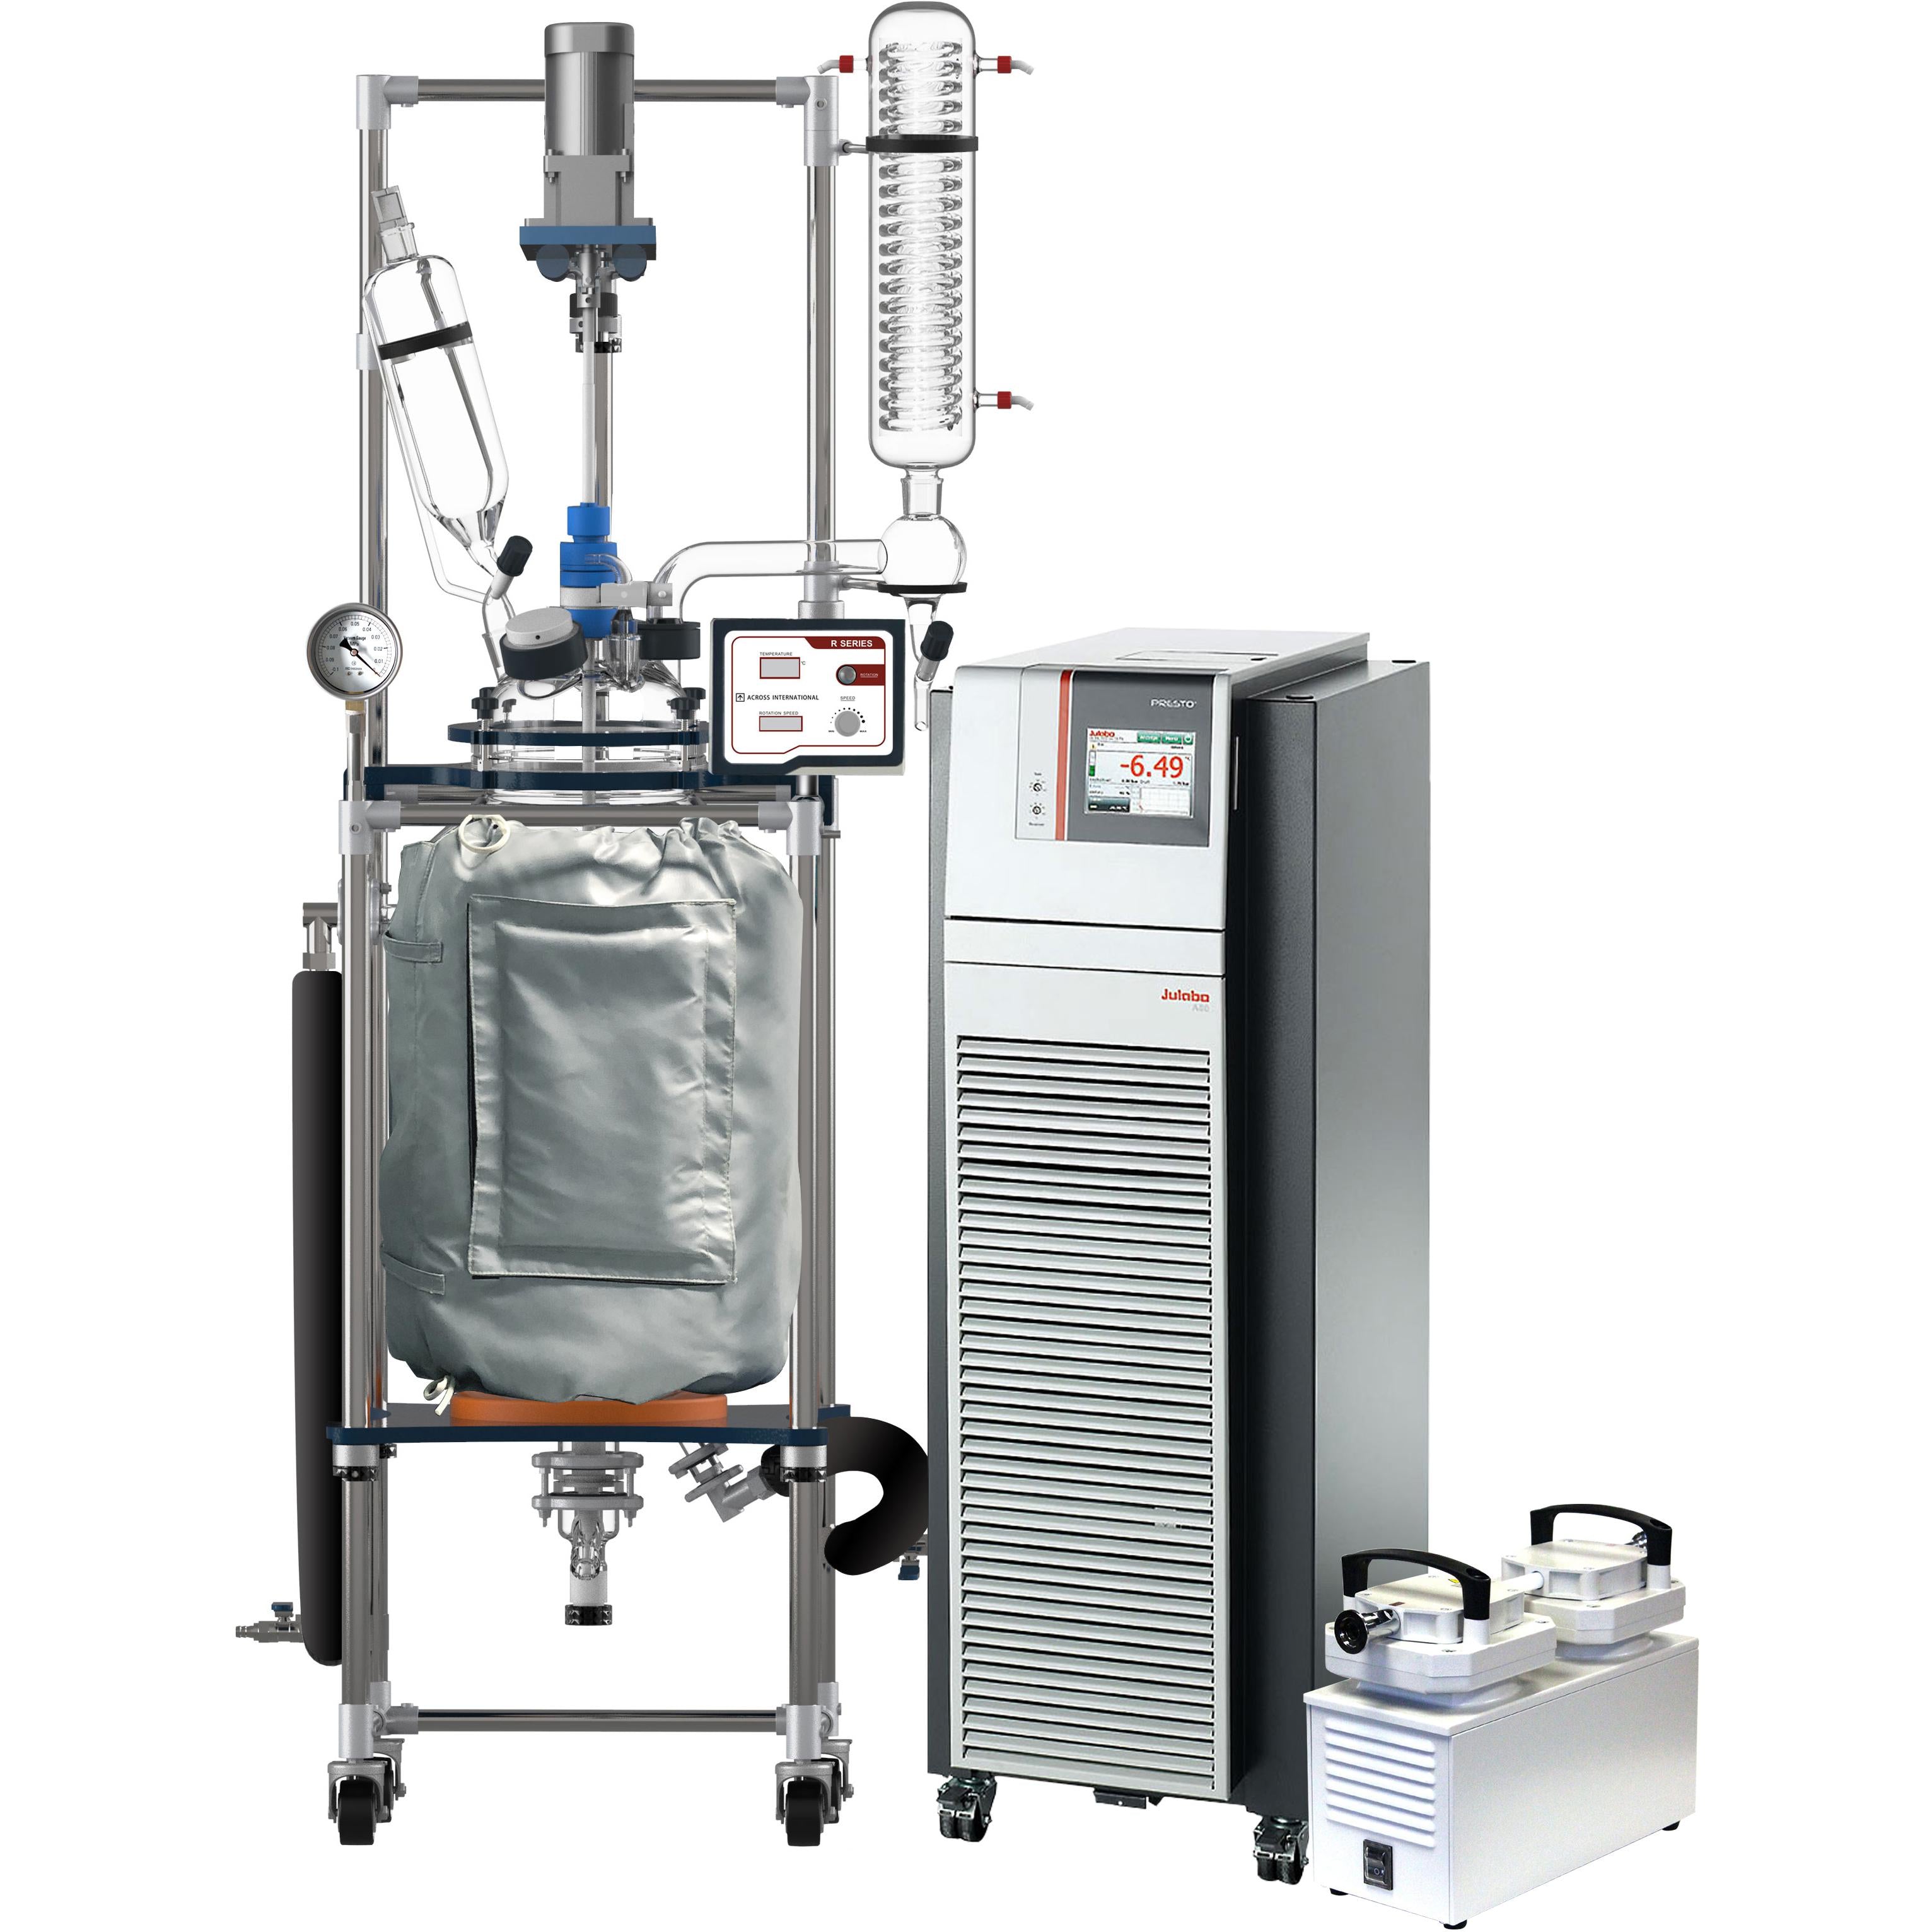 Ai R Series Turnkey Jacketed Glass Reactor Kits, 50 Liter, with Chiller & Pump